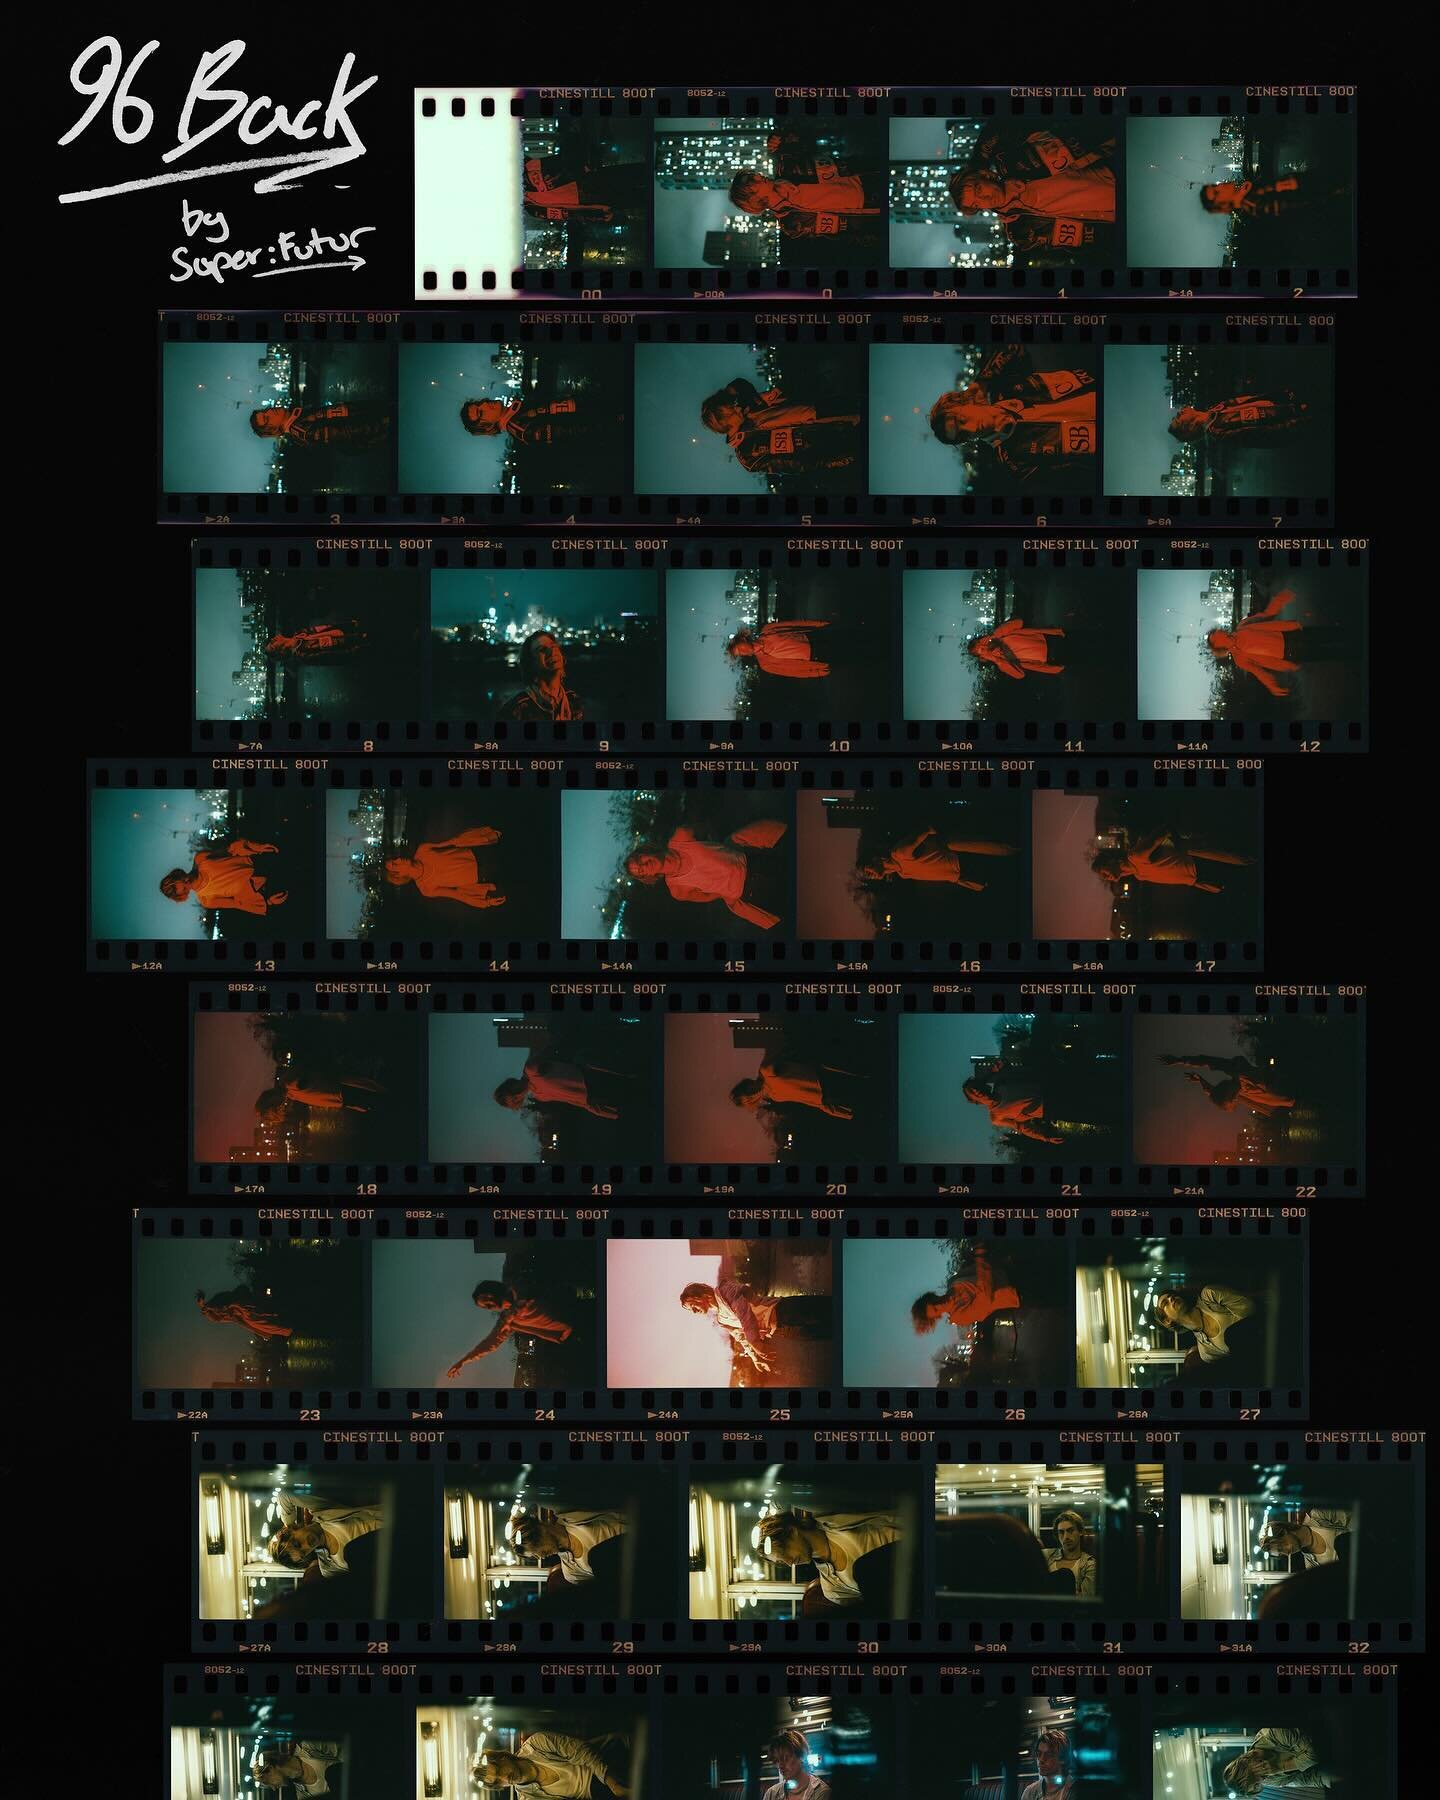 Contact sheets for a recent shoot with @96_back in Manchester🩸